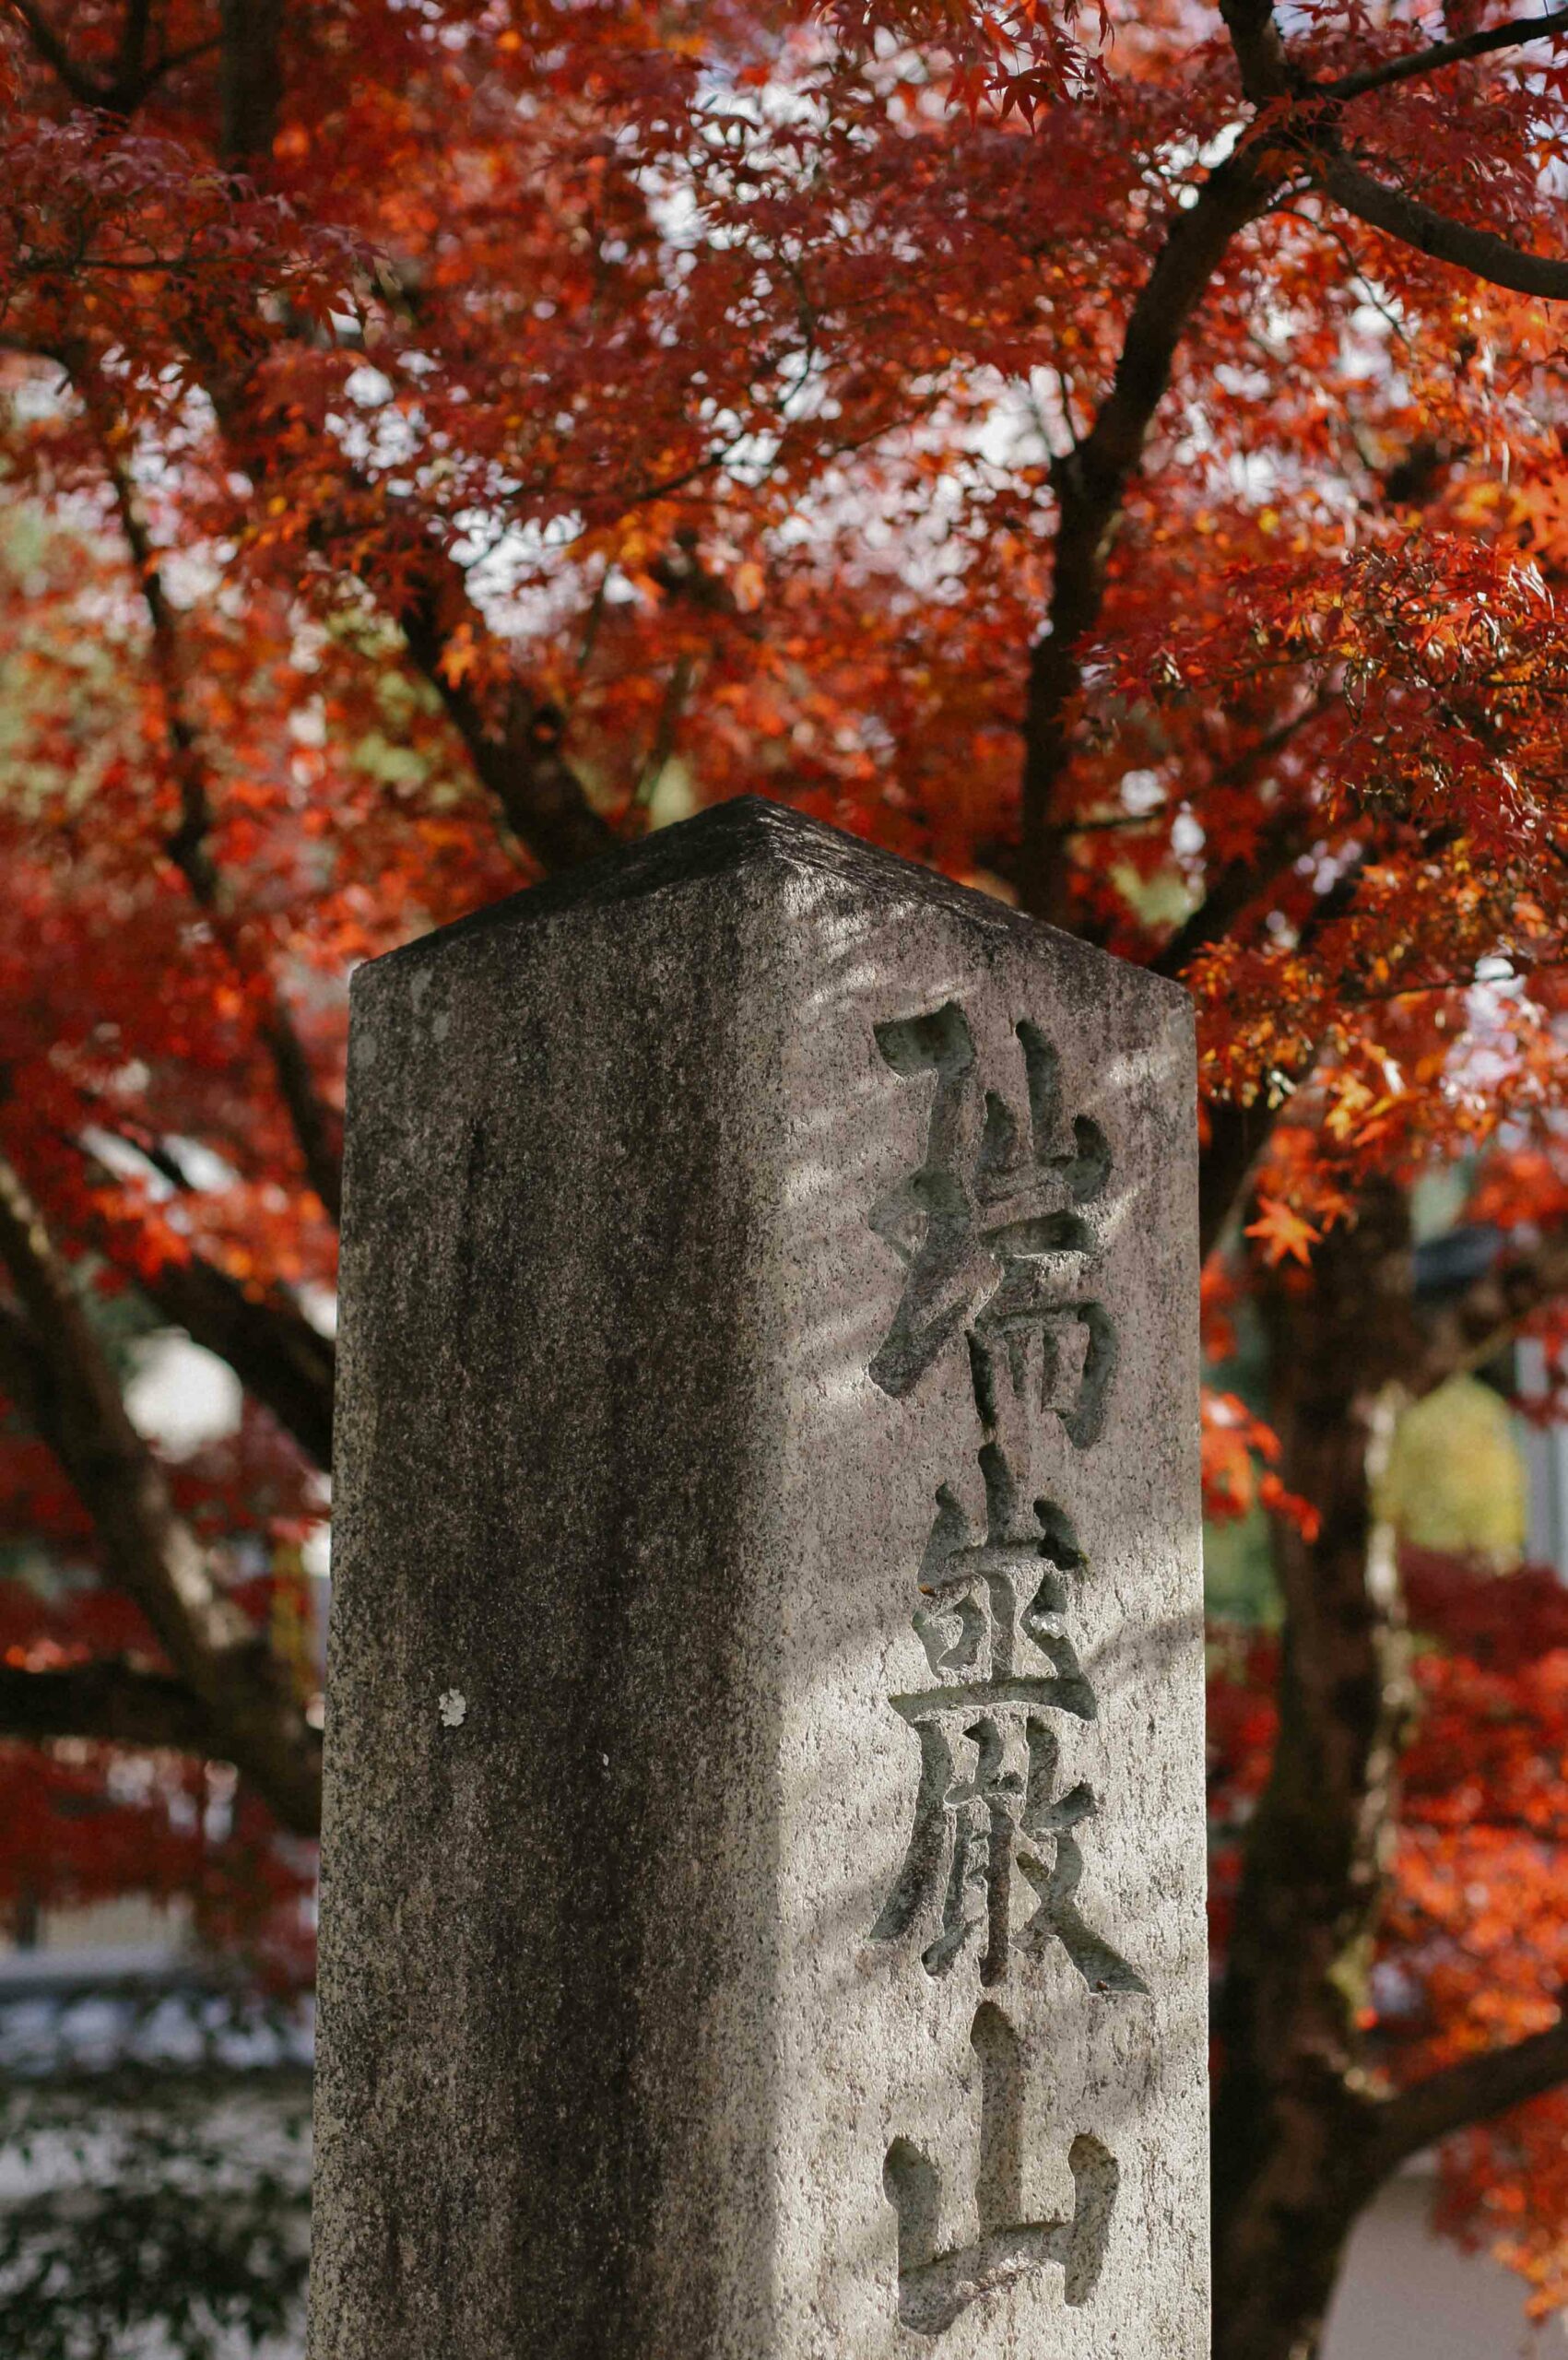 Enkoji is filled with traditional Japanese stone lanterns and decorative pillars.